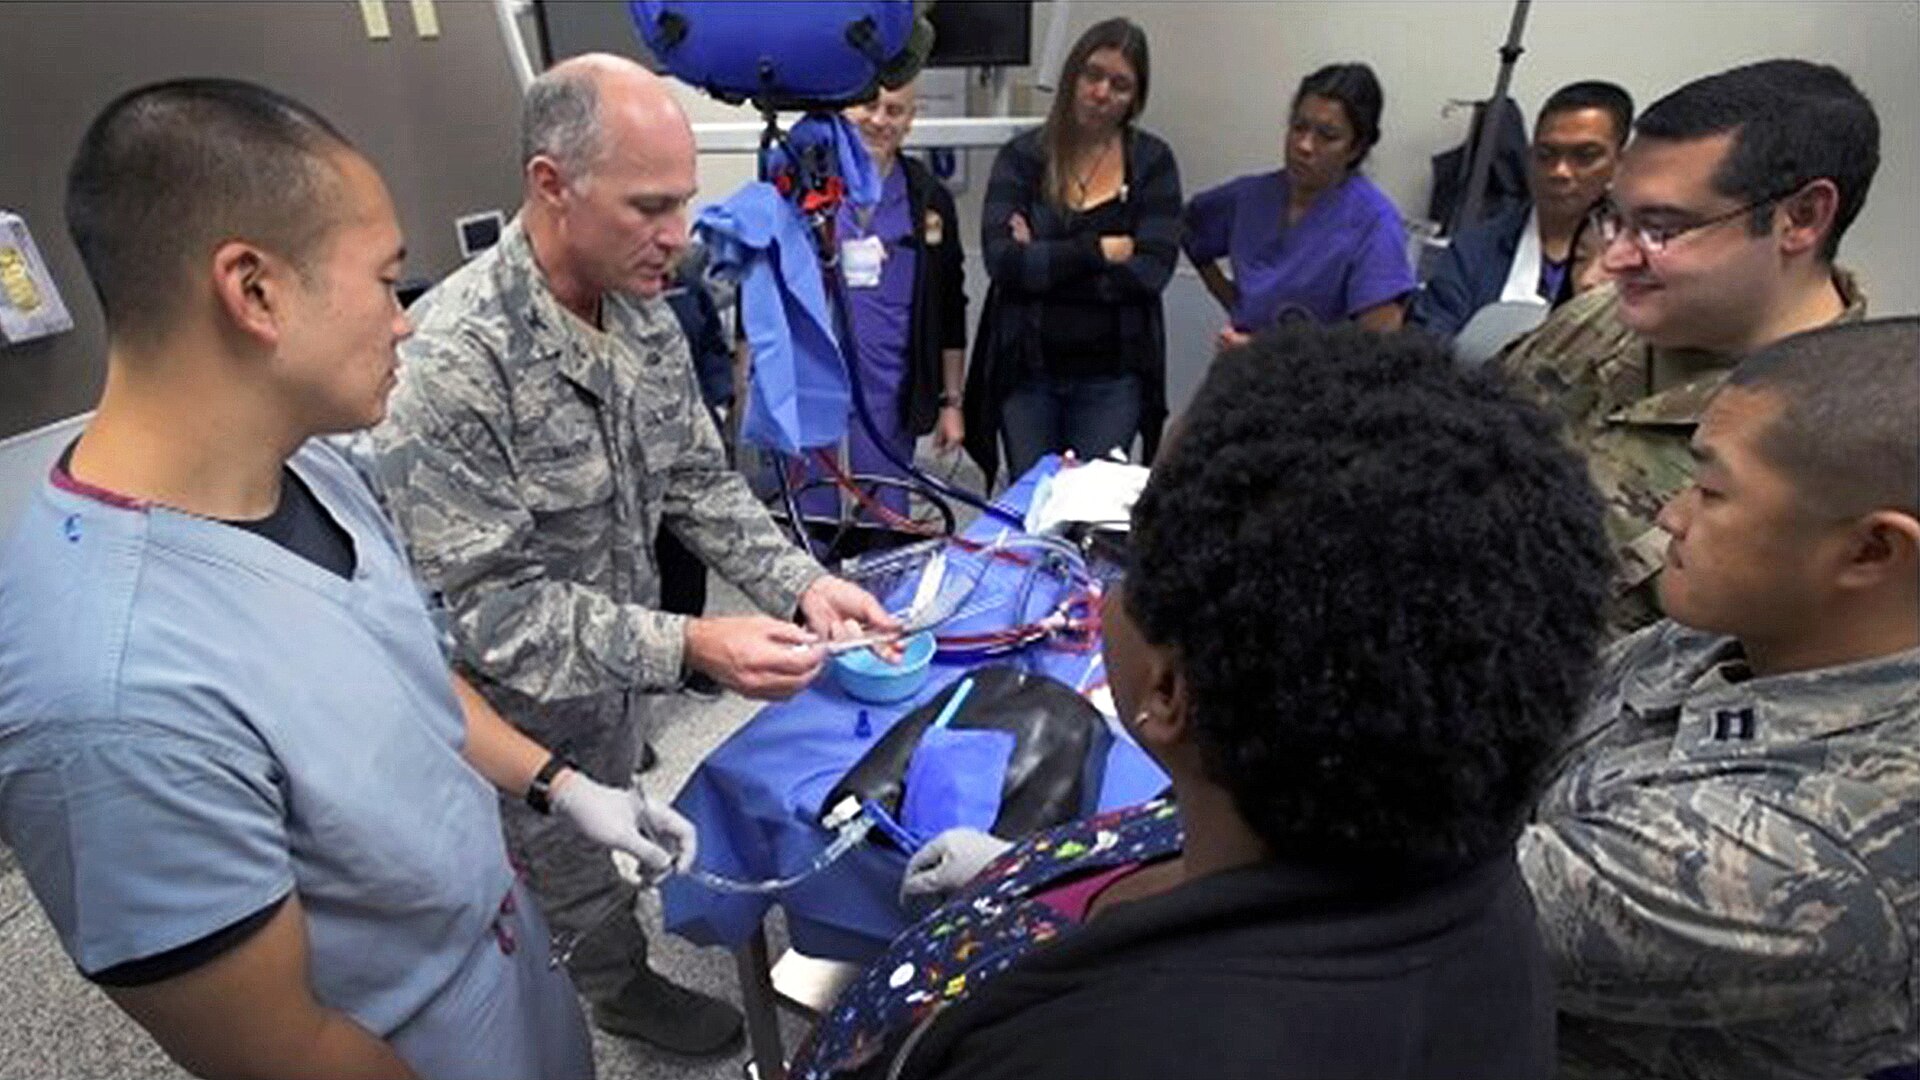 Air Force Col. (Dr.) Phillip Mason, medical director, Brooke Army Medical Center Adult ECMO Program, and other BAMC personnel instruct medical staff on proper extracorporeal membrane oxygenation, or ECMO, cannulation technique at Naval Medical Center San Diego, Dec. 11, 2019.